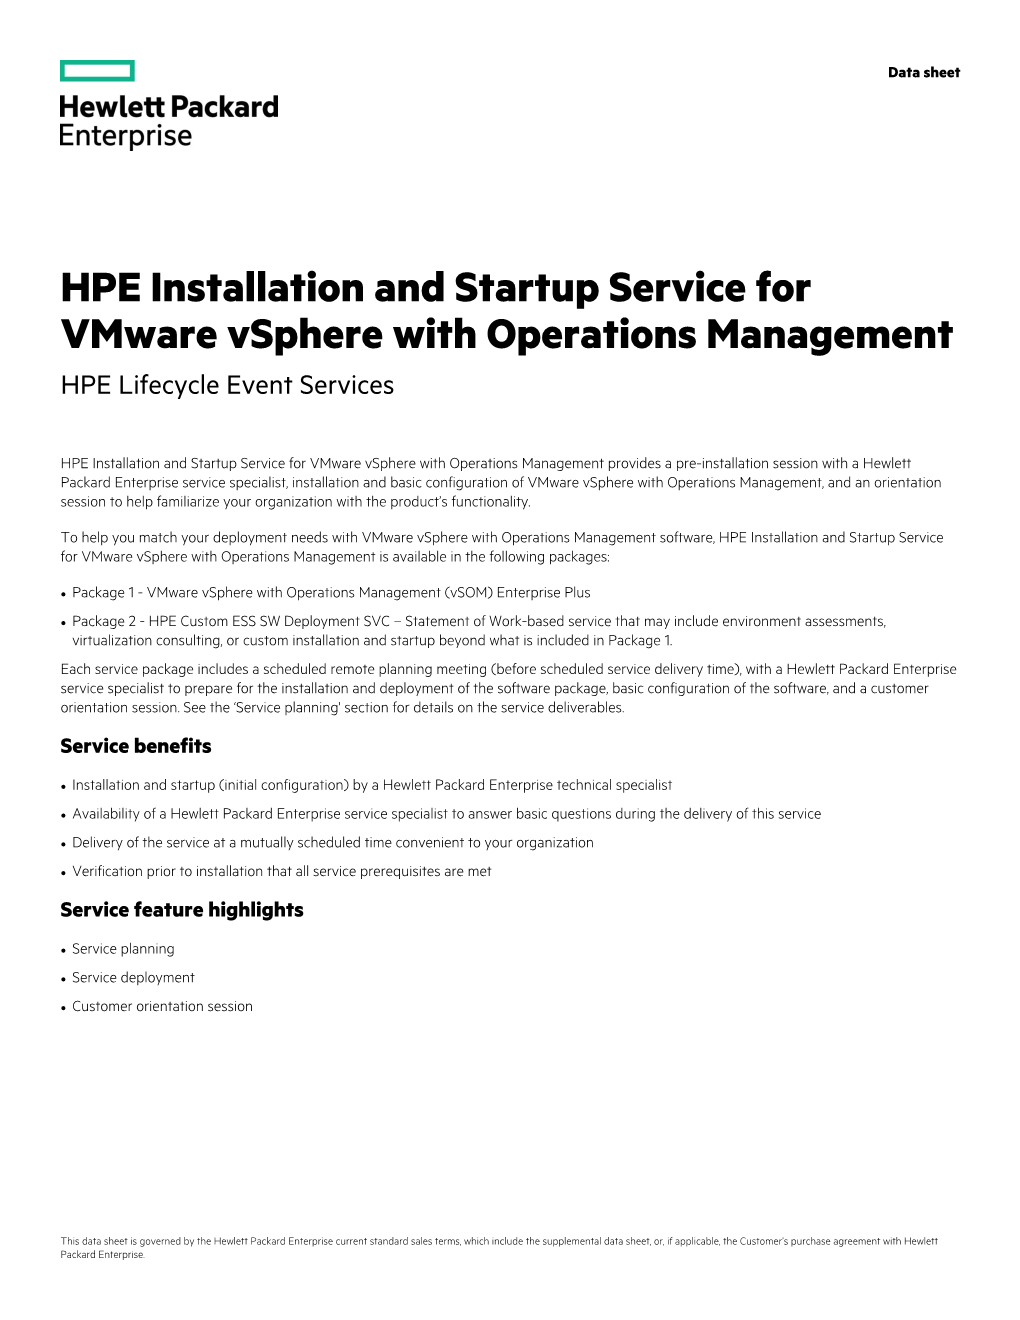 HPE Installation and Startup Service for Vmware Vsphere with Operations Management HPE Lifecycle Event Services